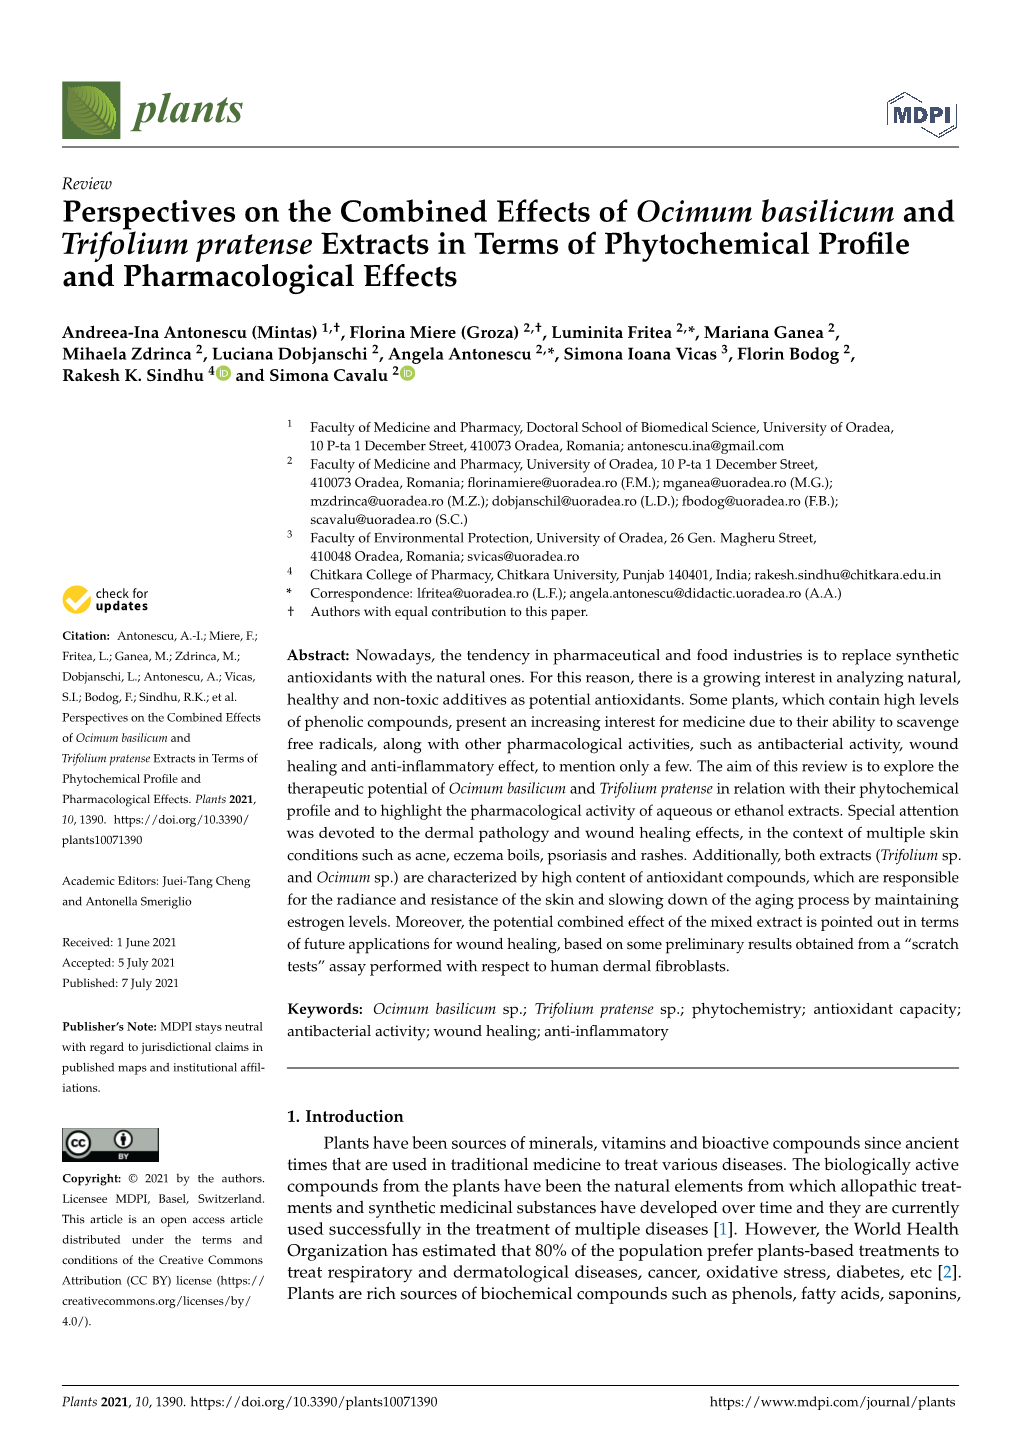 Perspectives on the Combined Effects of Ocimum Basilicum and Trifolium Pratense Extracts in Terms of Phytochemical Proﬁle and Pharmacological Effects